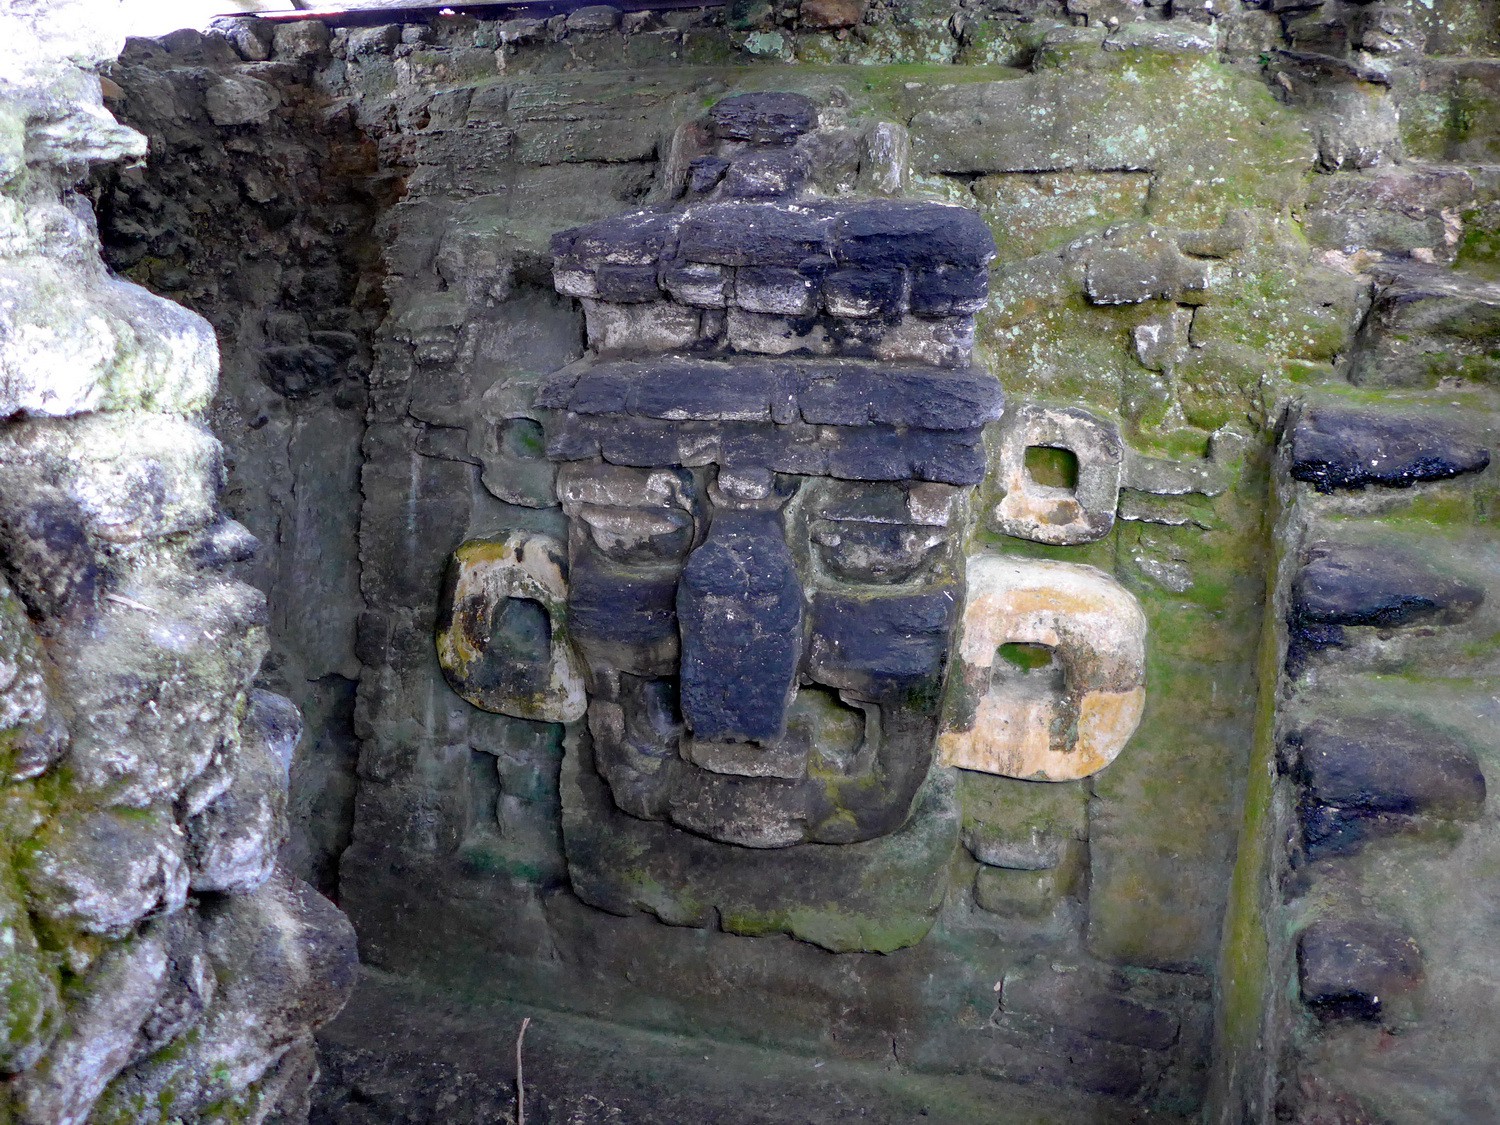 Another huge head of Tikal